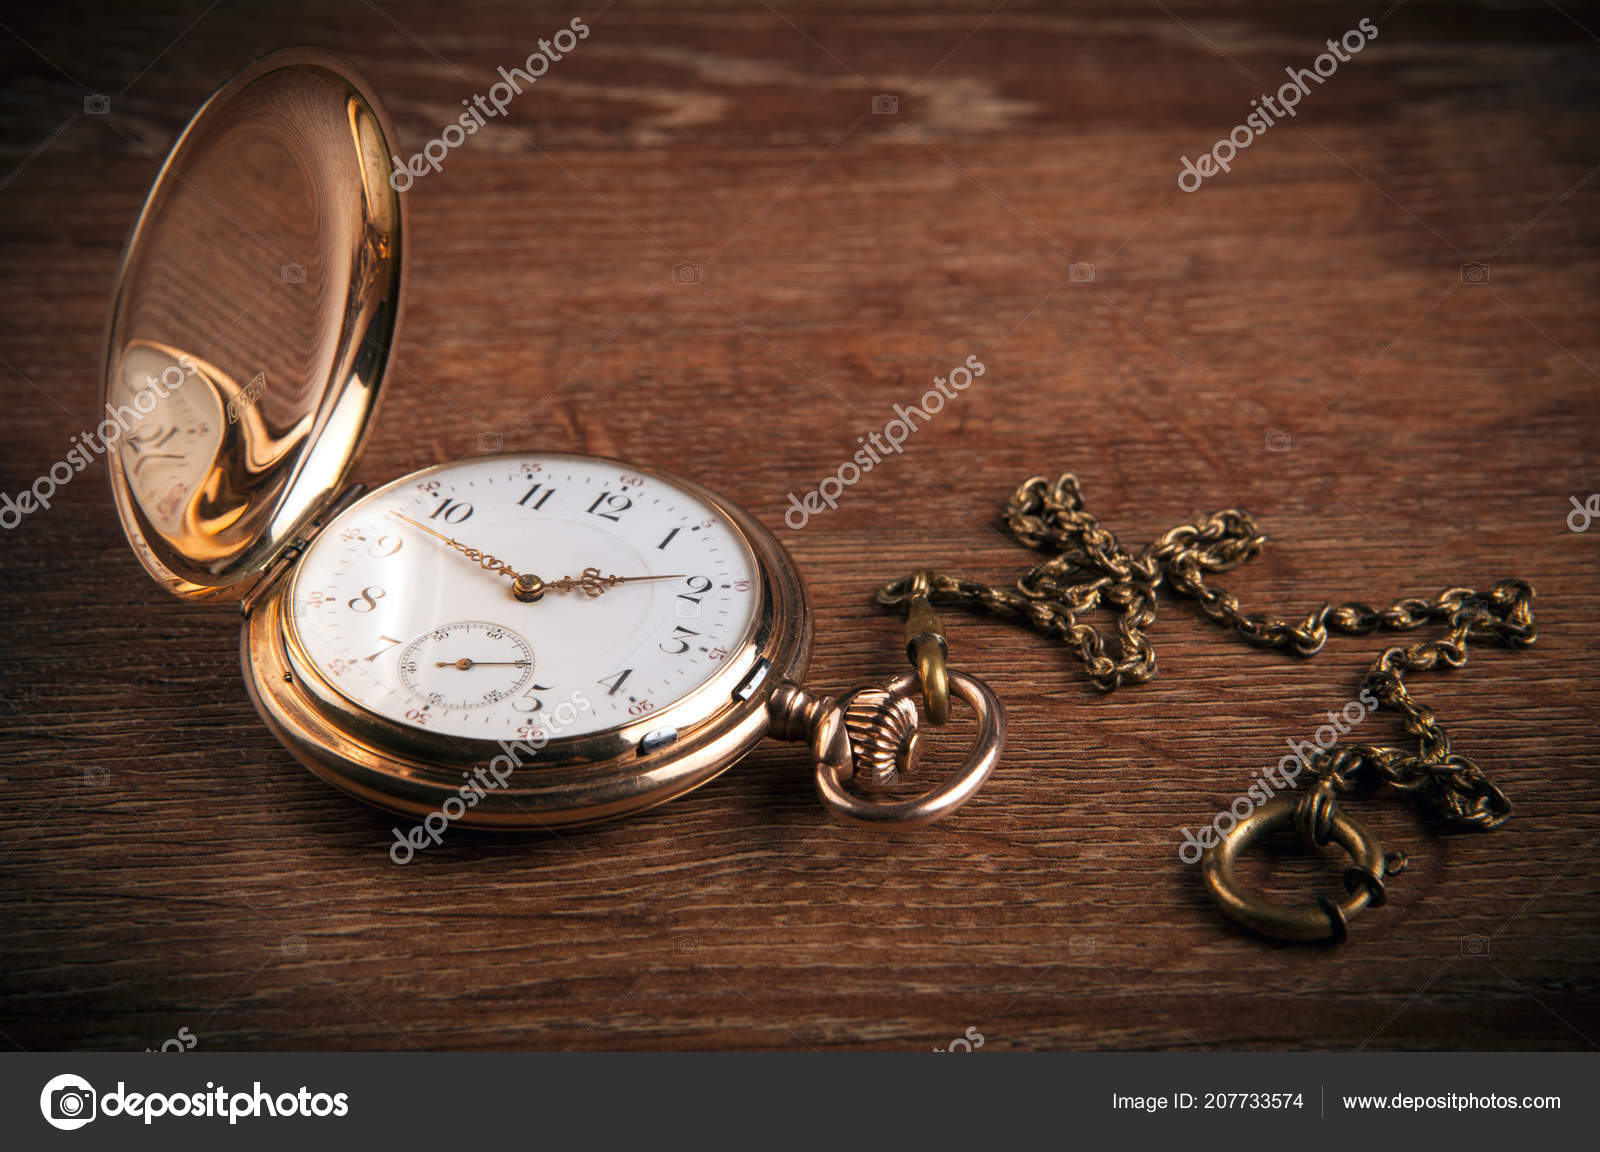 Antique Gold Pocket Watch Lies Wooden Table Close Stock Photo Image By C Mizar 219842 207733574